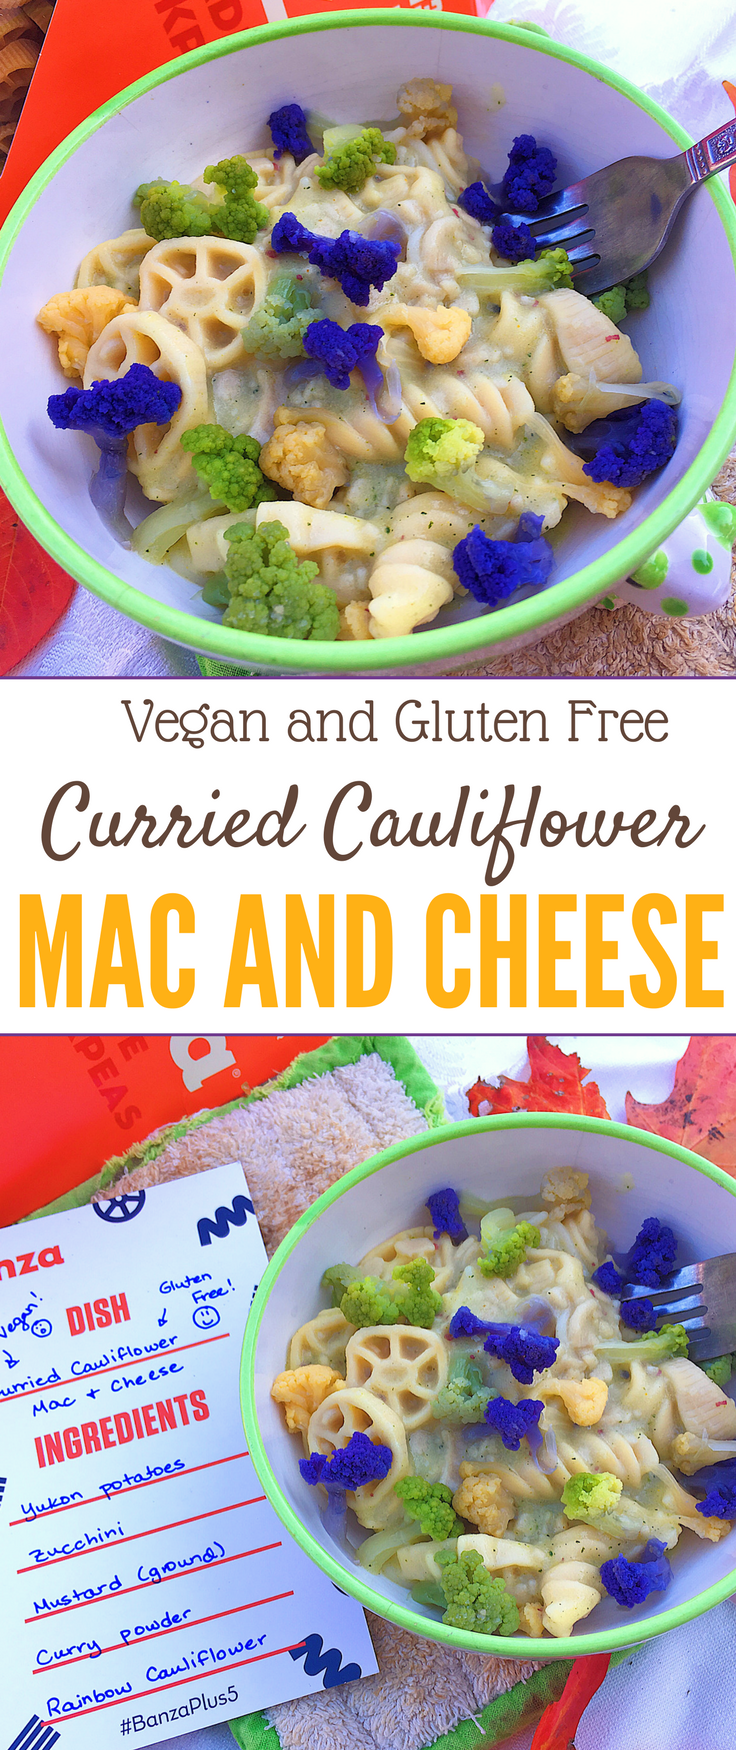 AD Craving some #vegan mac & cheese? Try this curried cauliflower mac & cheese, which is also #glutenfree plus packed with veggies & a lil' kick!